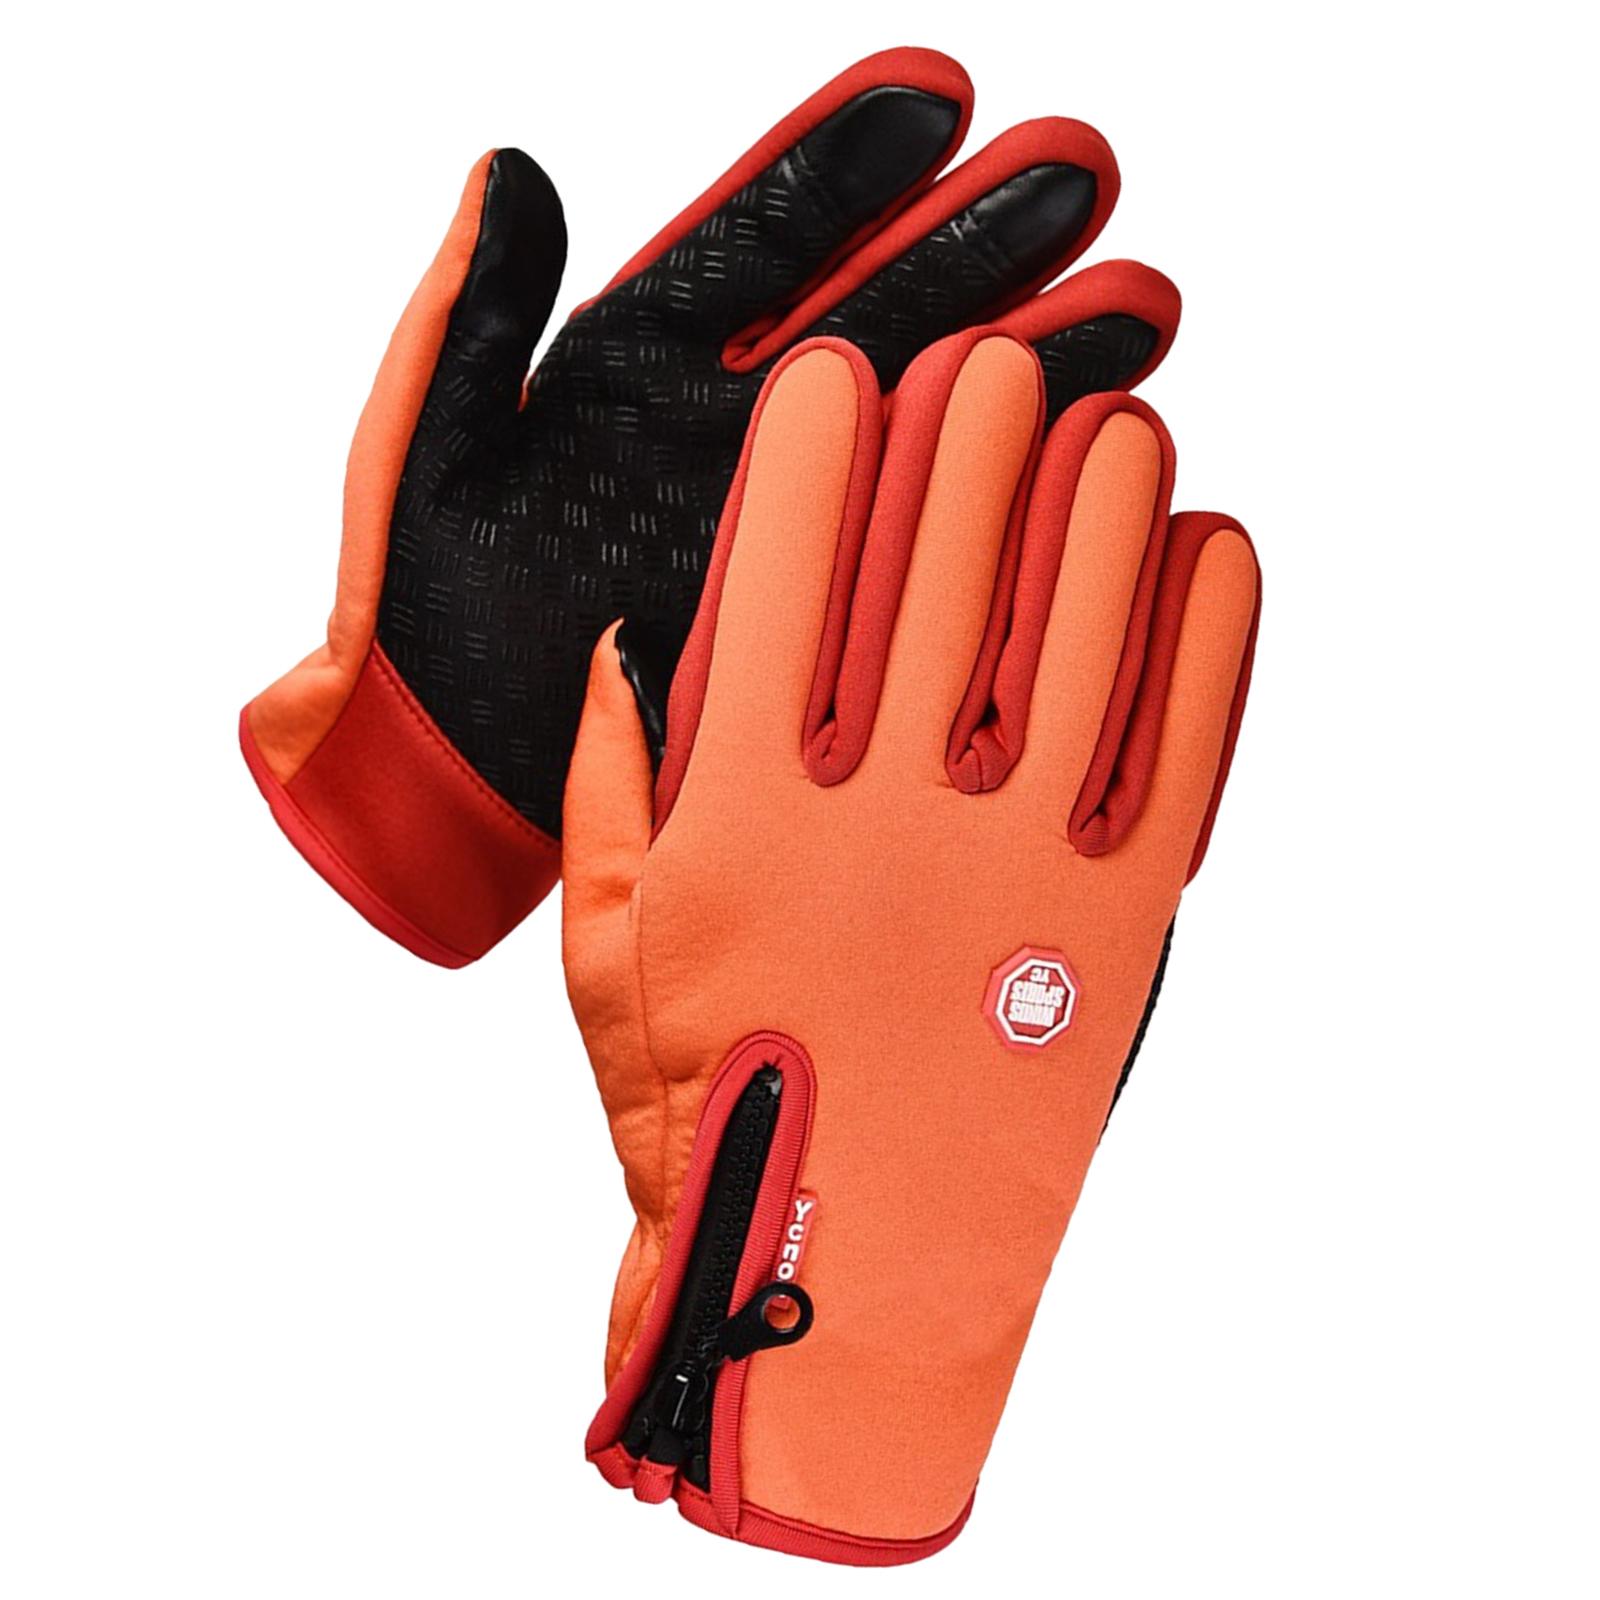 Winter Gloves Nonslip Thermal Gloves for Outdoor Running Sports Motorcycle Orange L